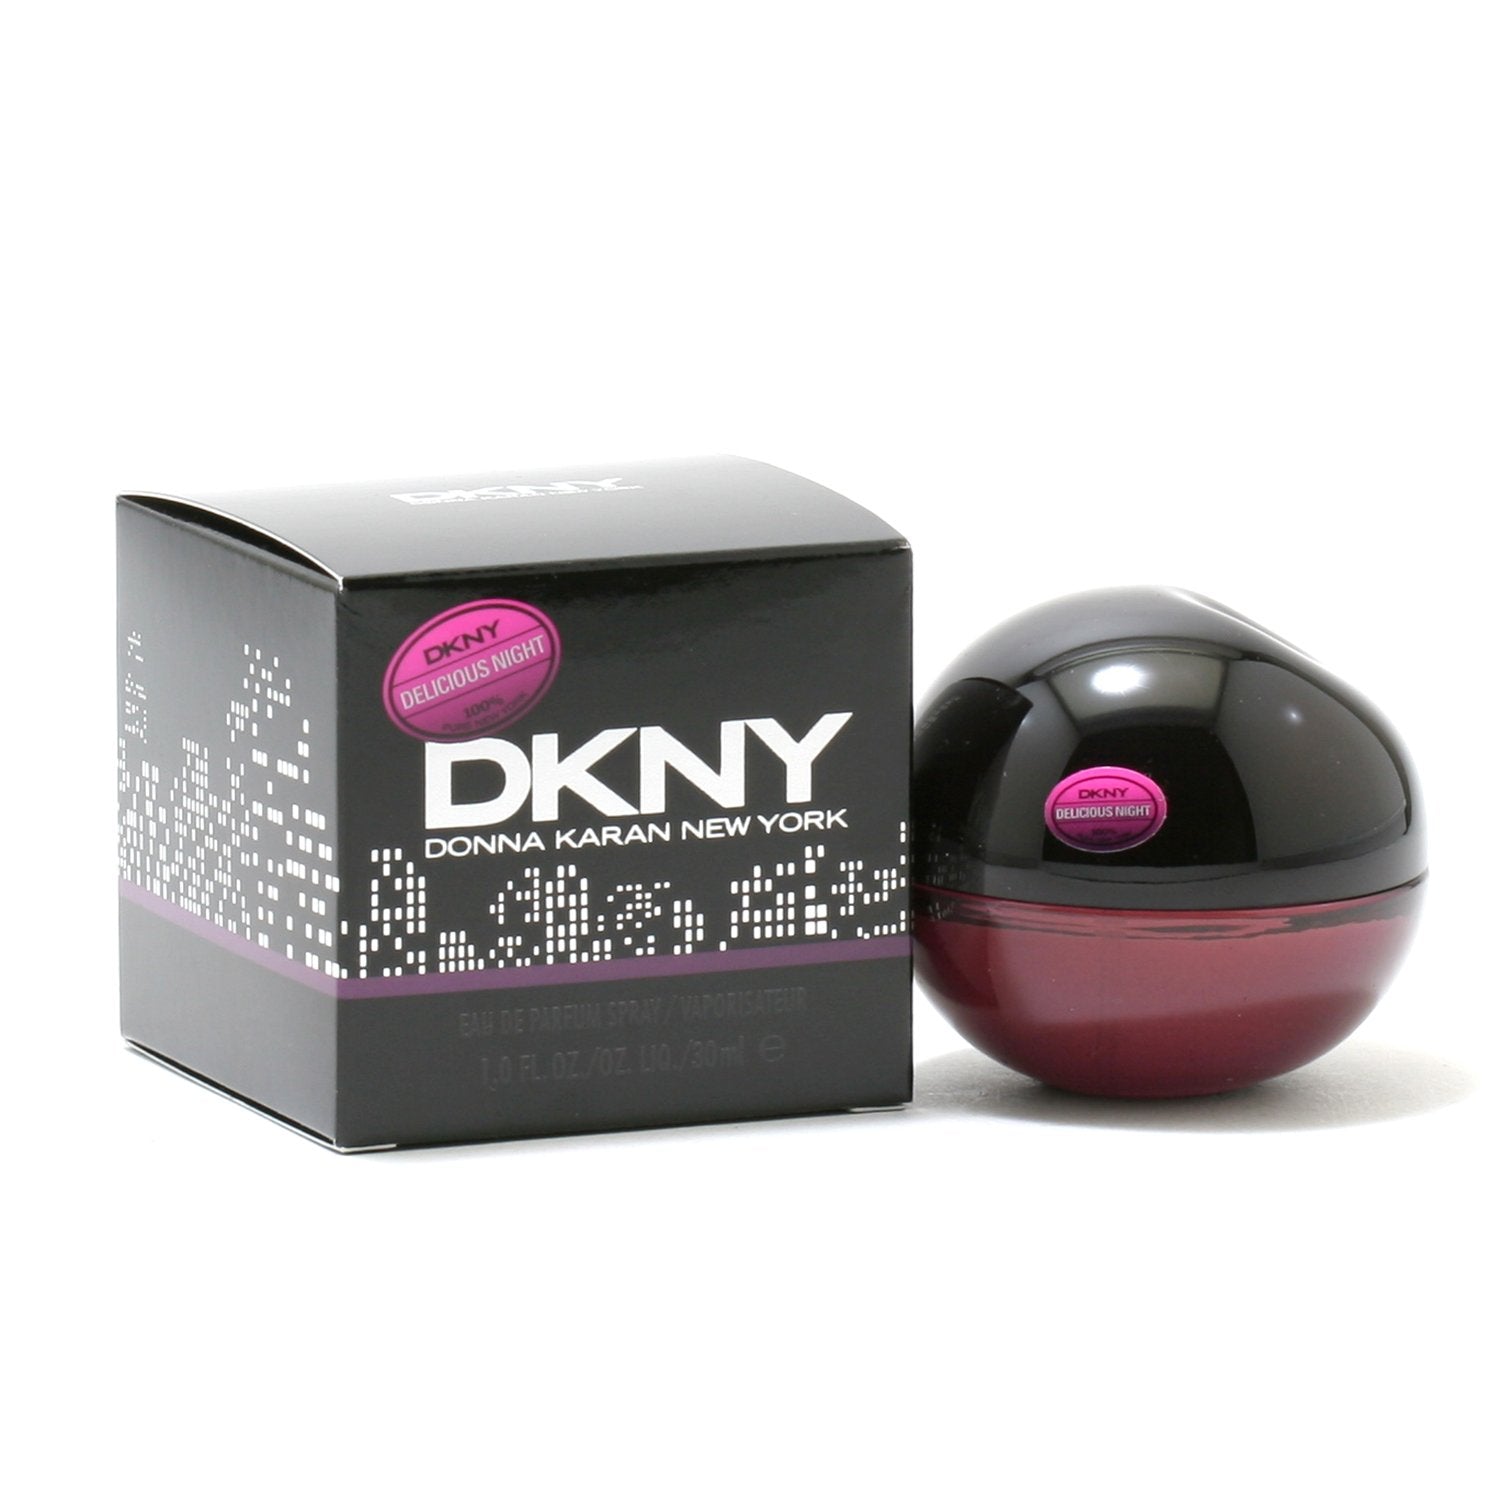 Inter Parfums' Donna Karan and DKNY fragrance deal comes into effect